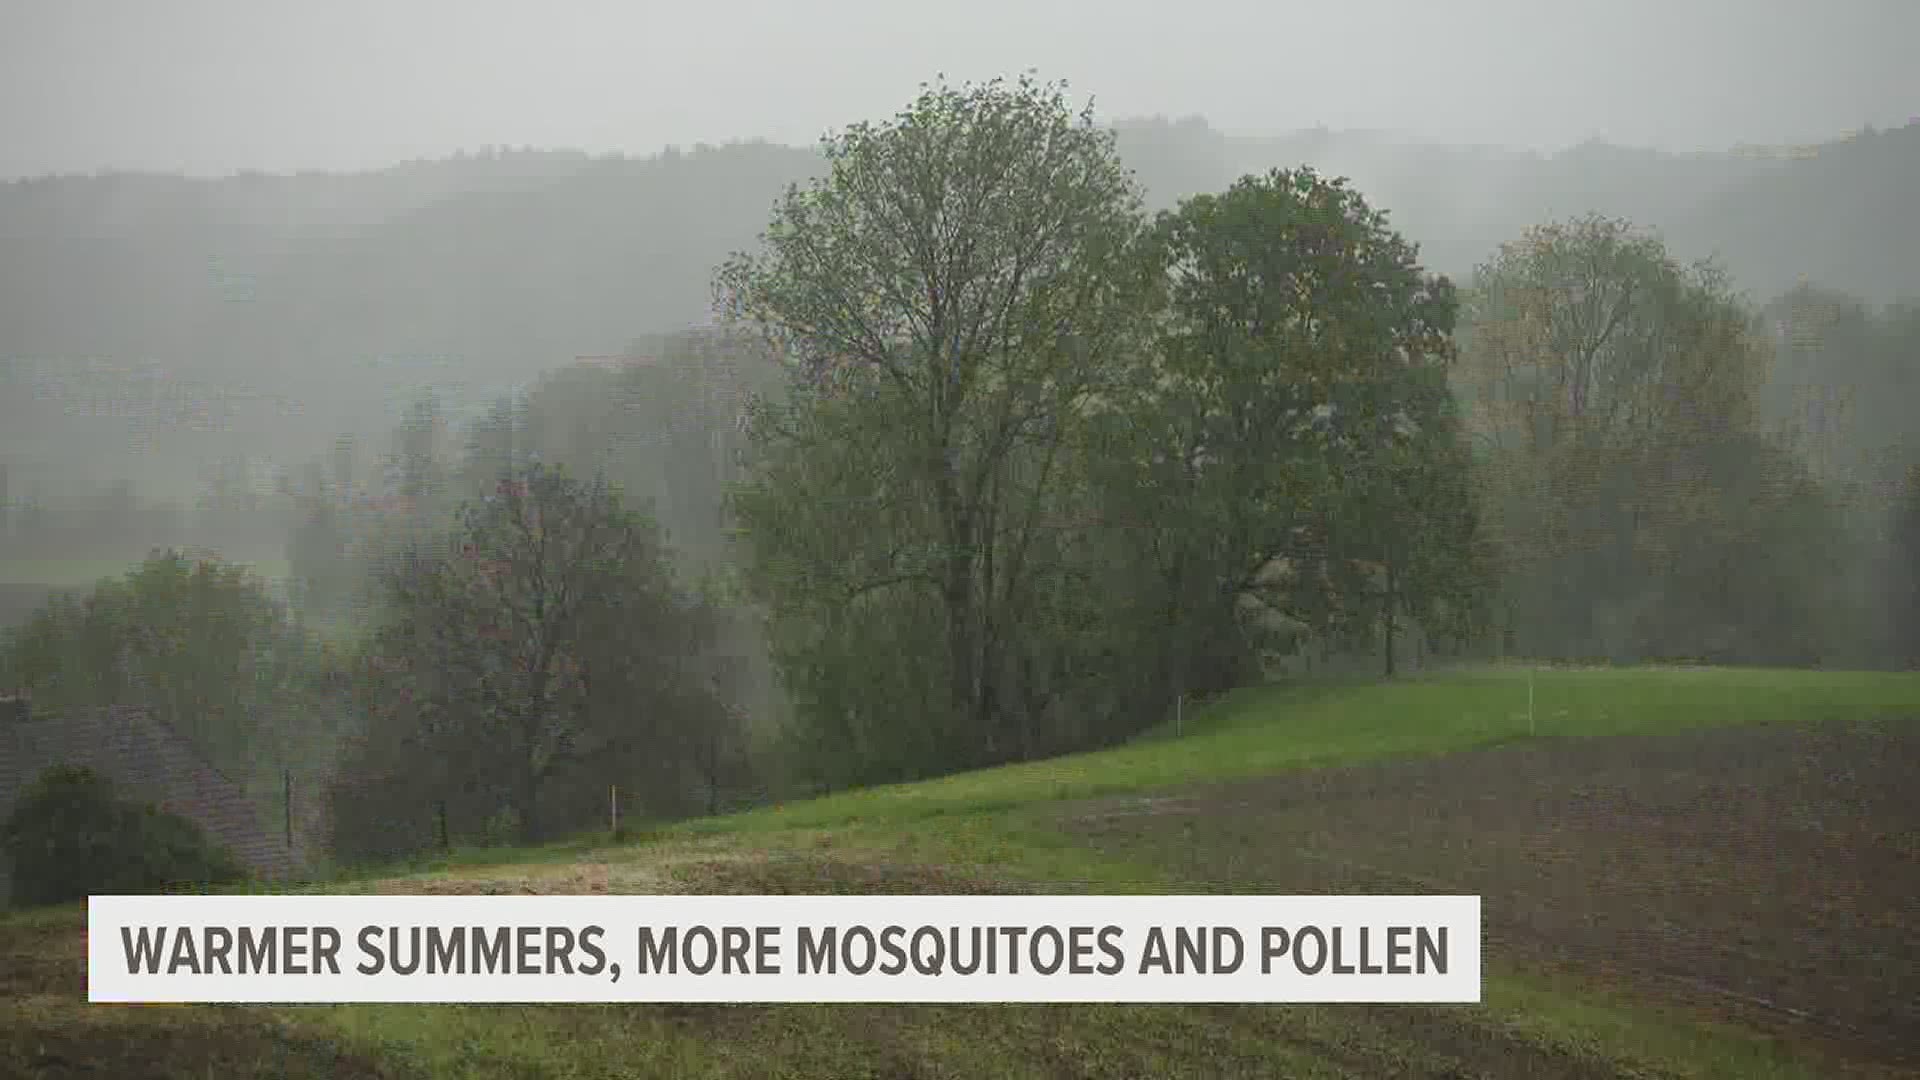 We're itching and sneezing more because of climate change, with longer pollen and bug seasons becoming the norm. It's only going to worsen as the warming continues.